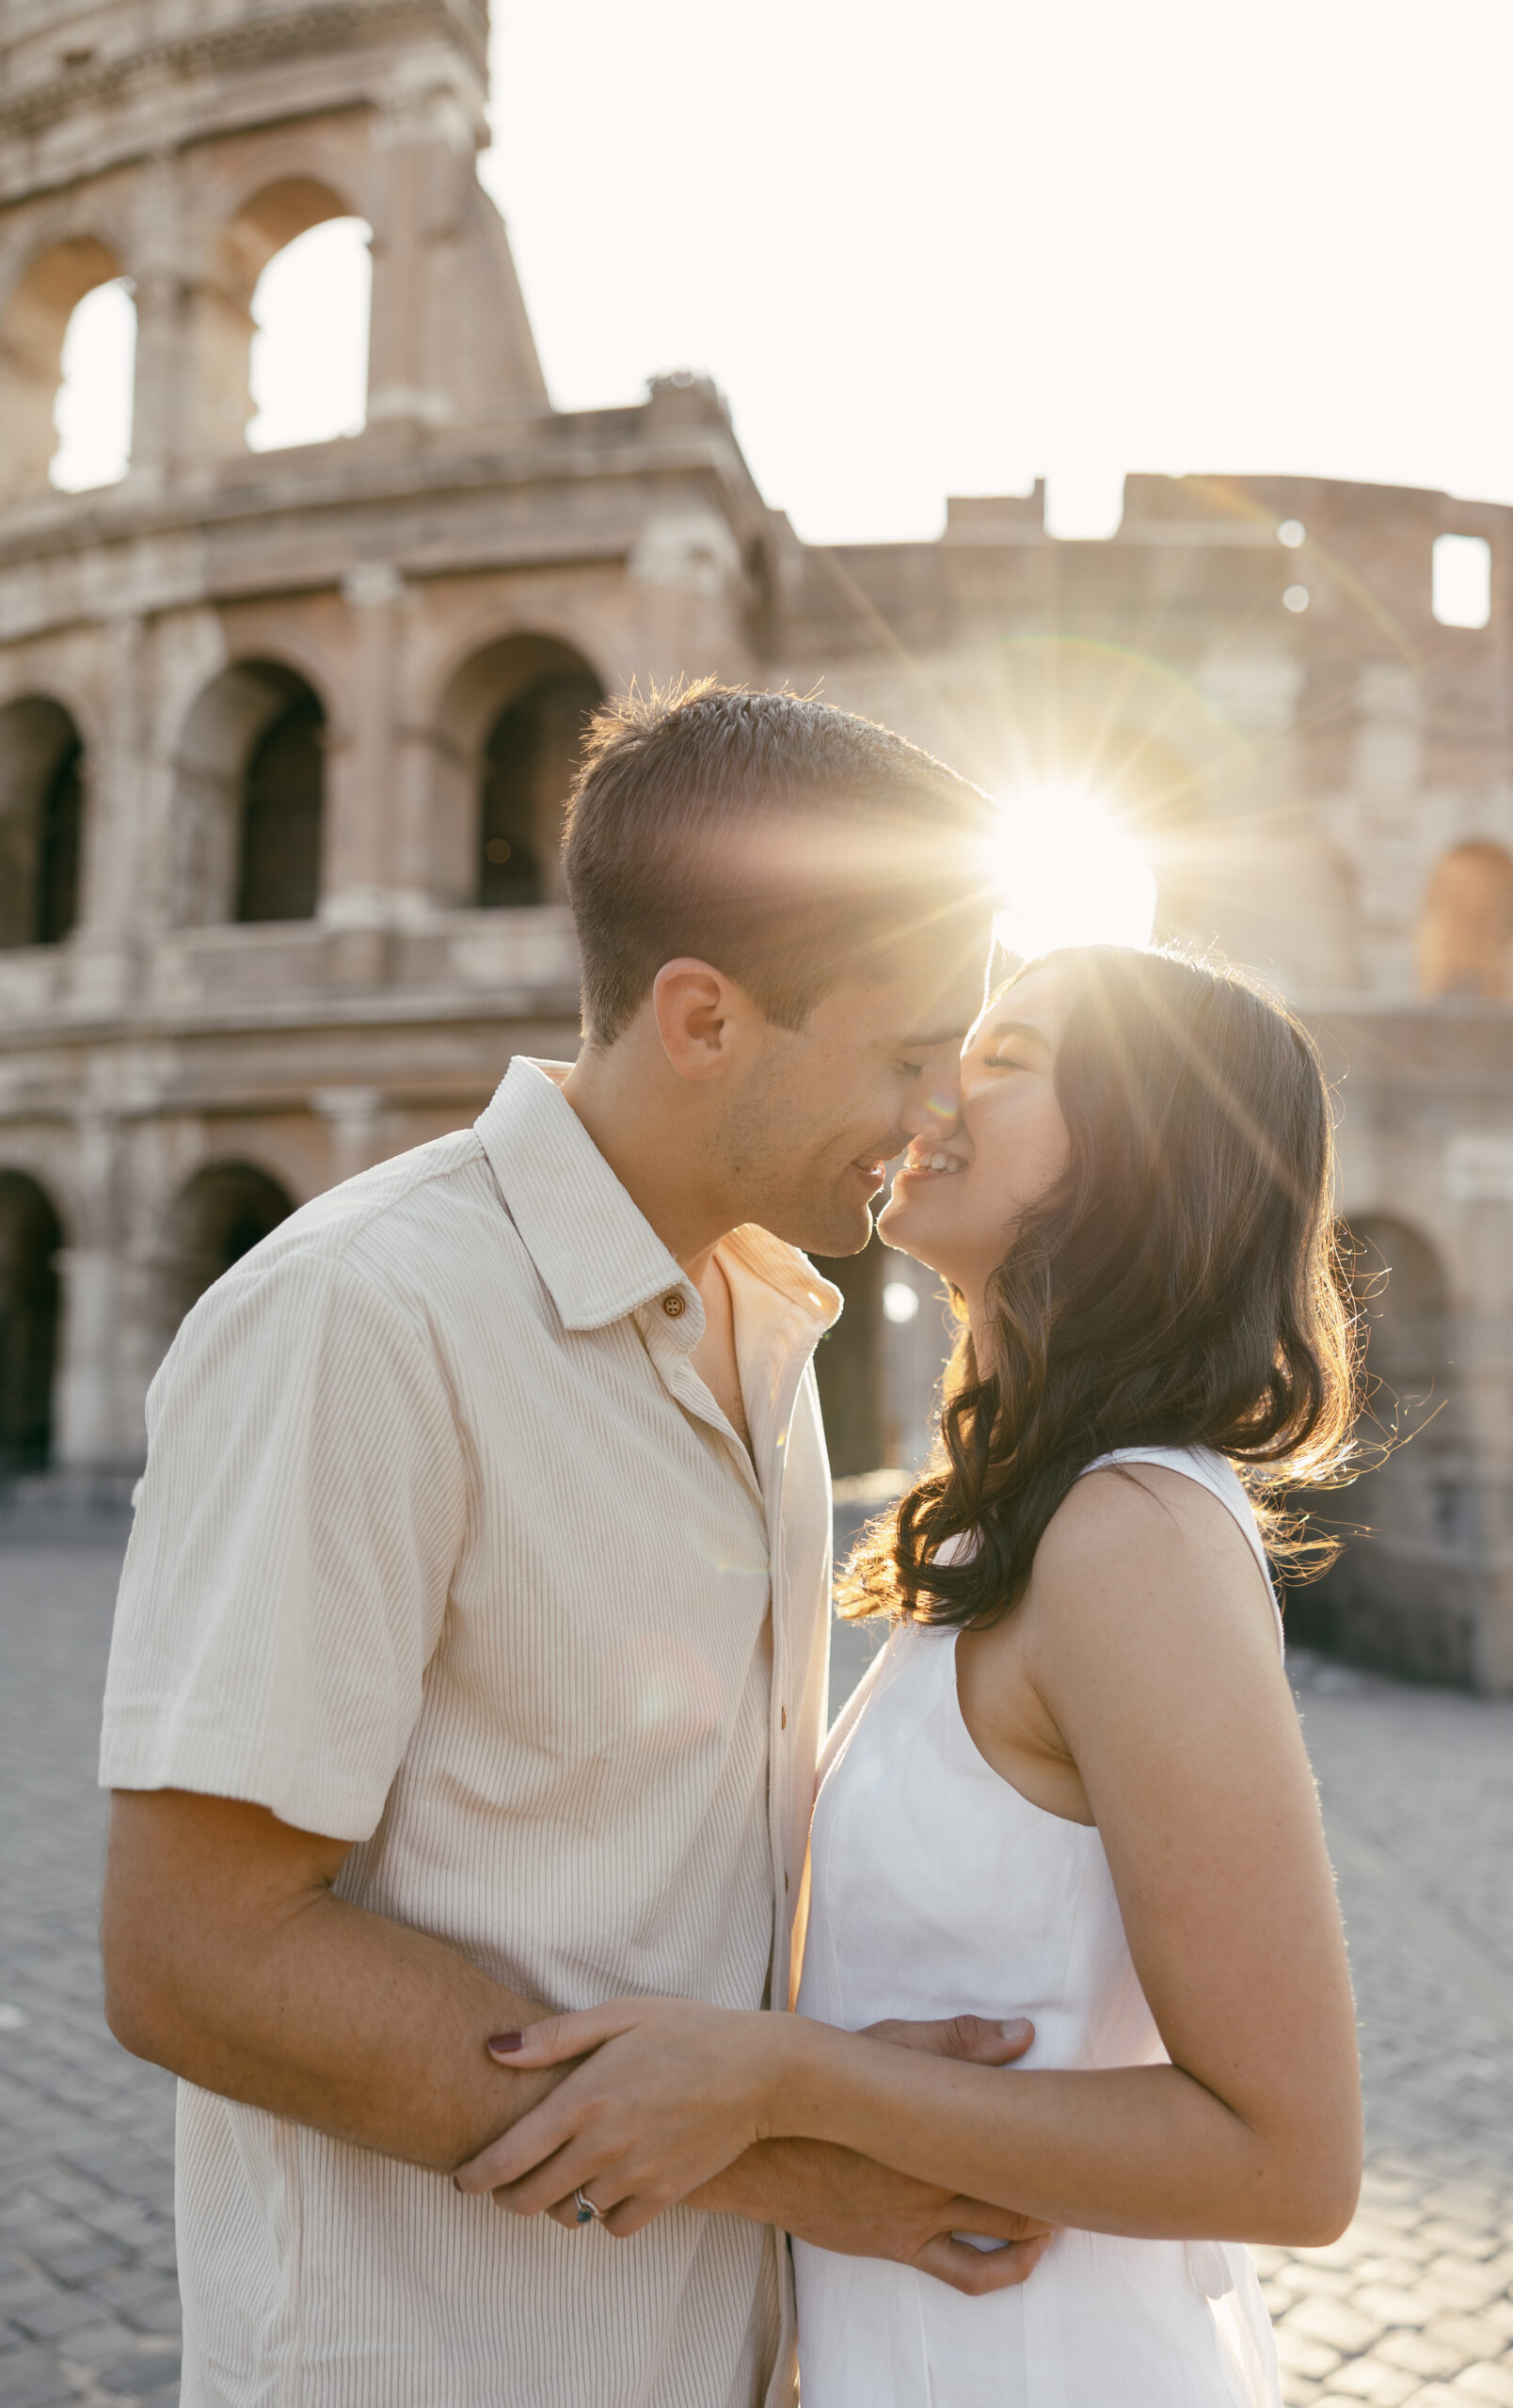 Couple kisses at the Colosseum in Rome, Italy